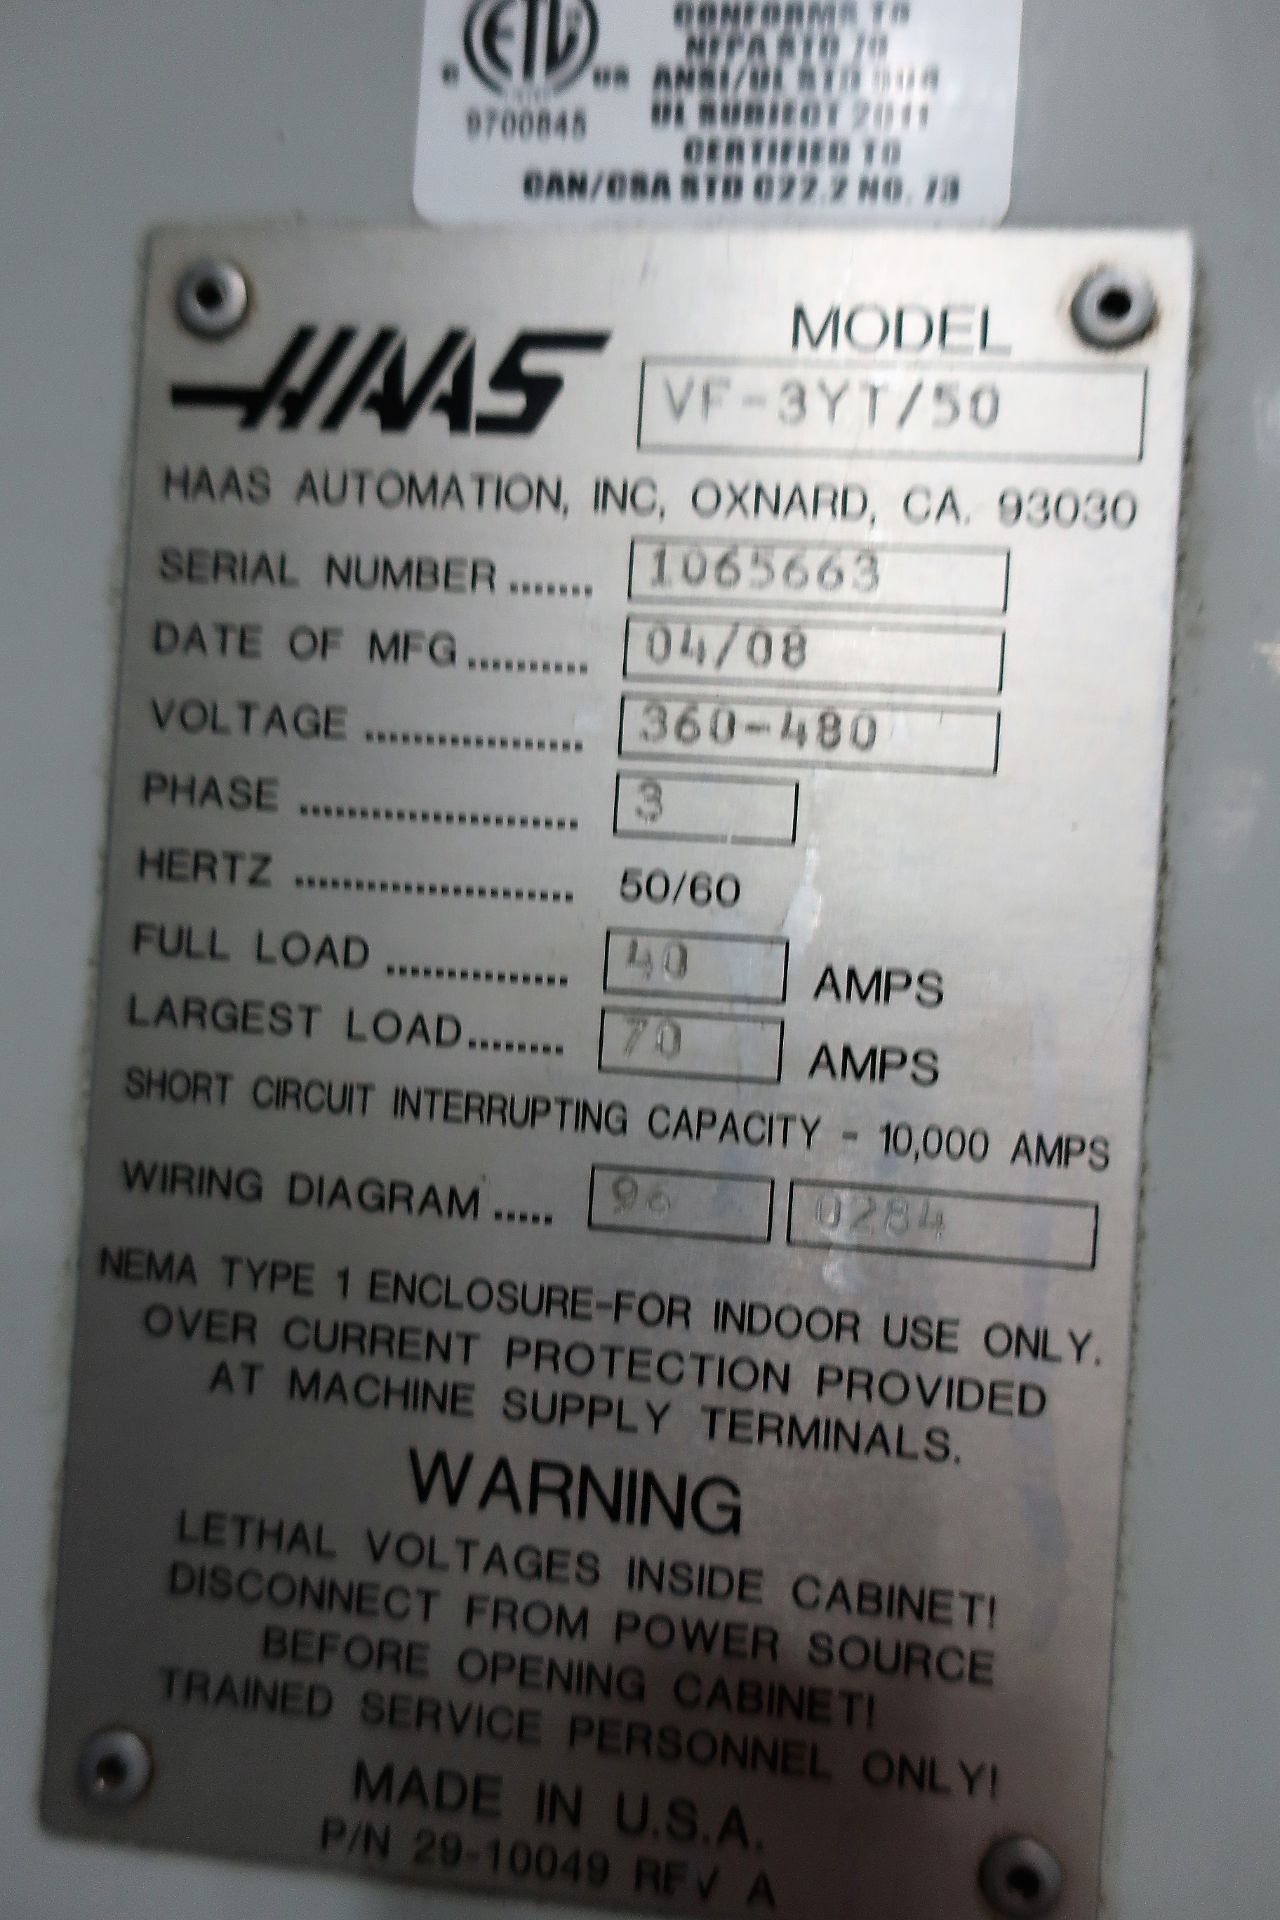 HAAS VF-3YT/50 CNC VERTICAL MACHINING CENTER, S/N 1065663, NEW 2008 - Image 11 of 11